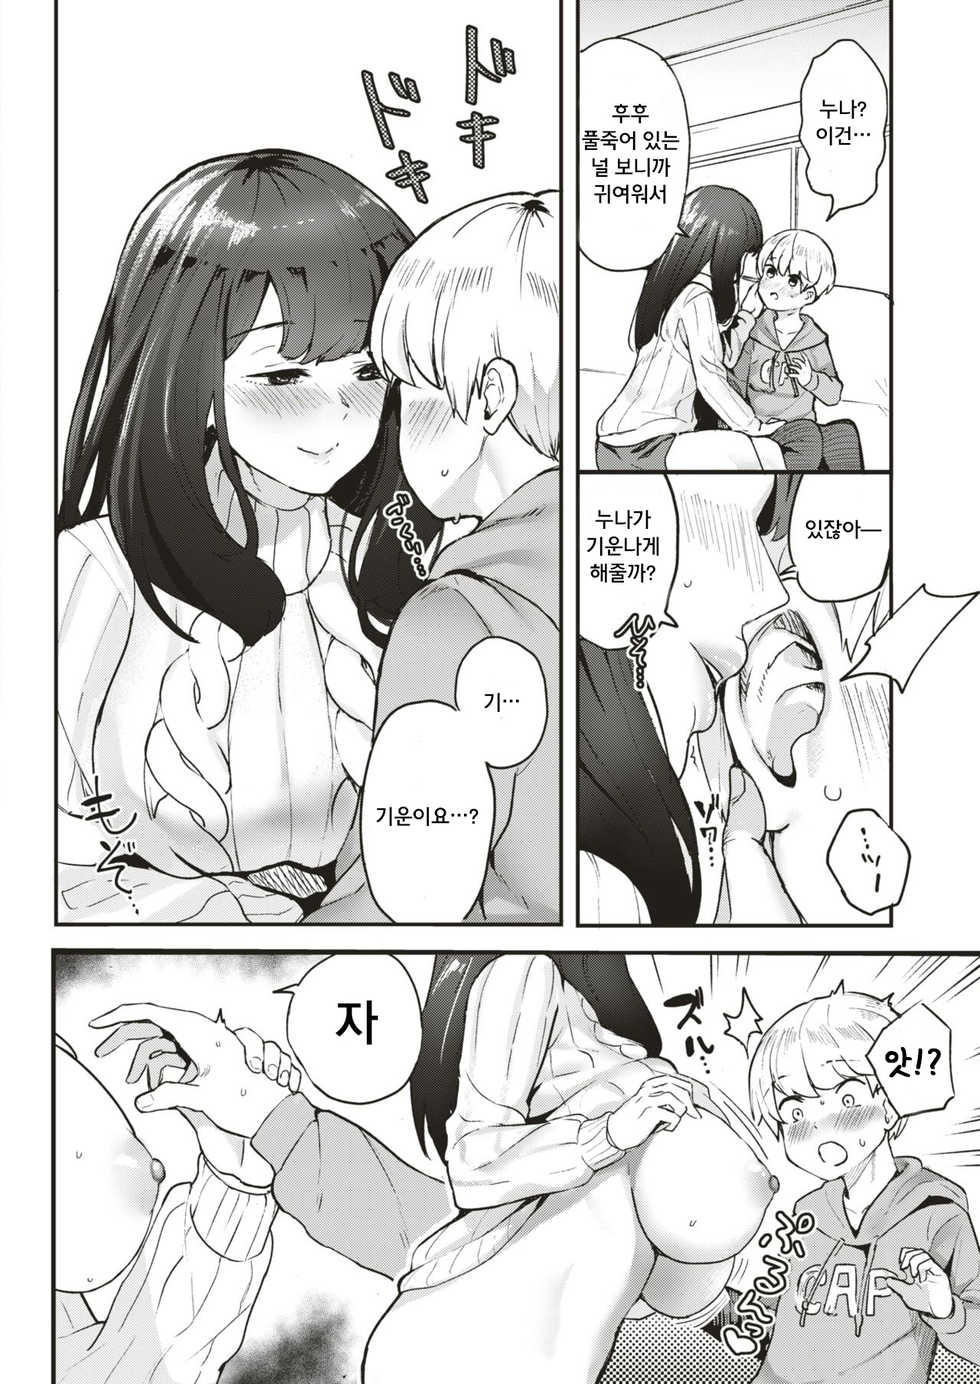 [ababari] Tomodachi no Onee-san - Your sister is fucking special | 친구의 누나 (COMIC X-EROS #79) [Korean] [Digital] - Page 6